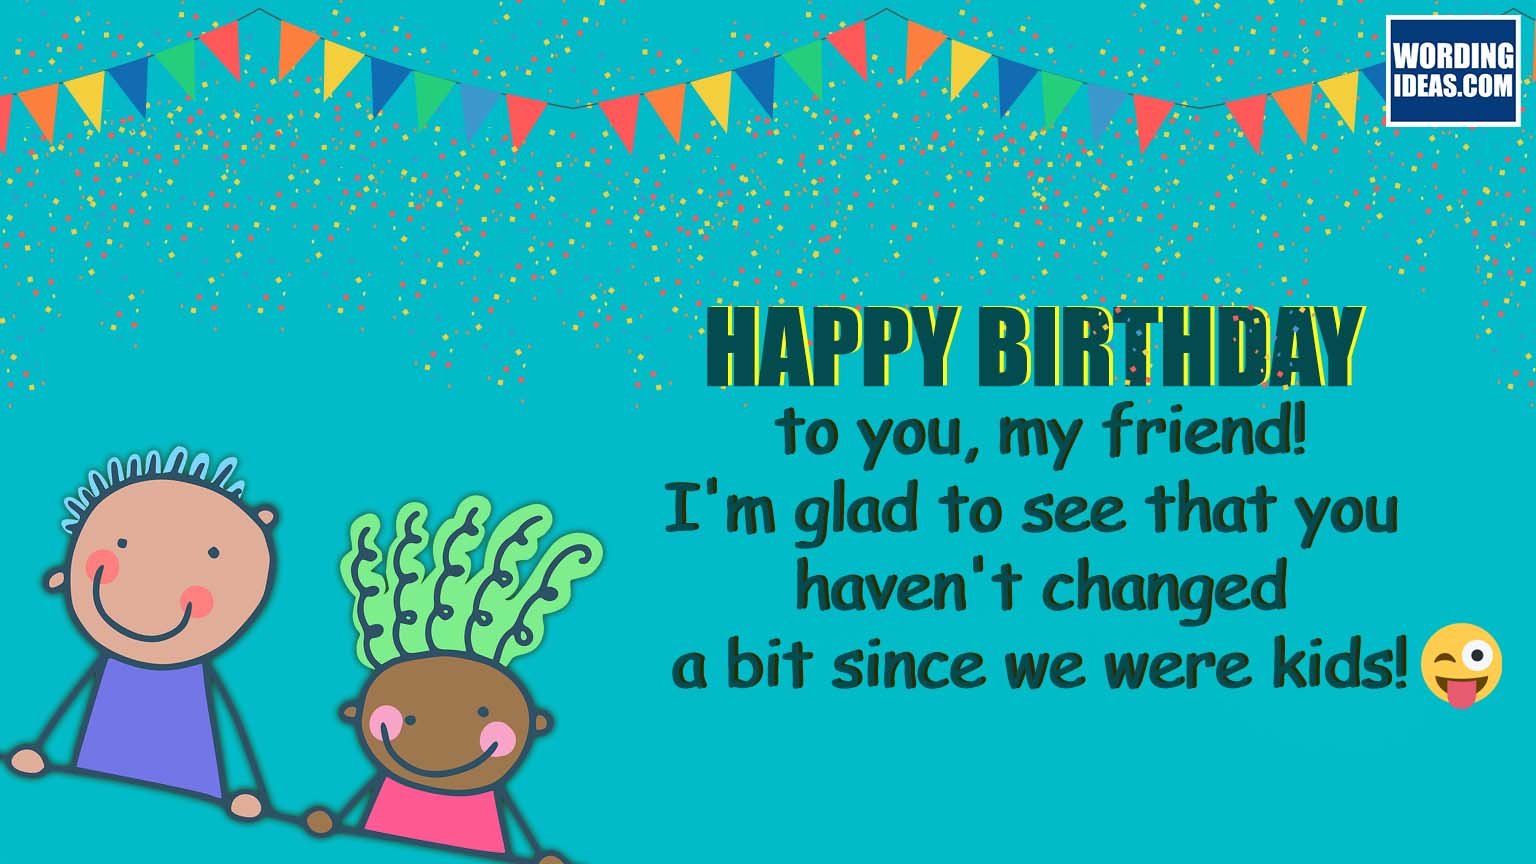 FUNNY-BIRTHDAY-WISHES-FOR-BEST-FRIEND